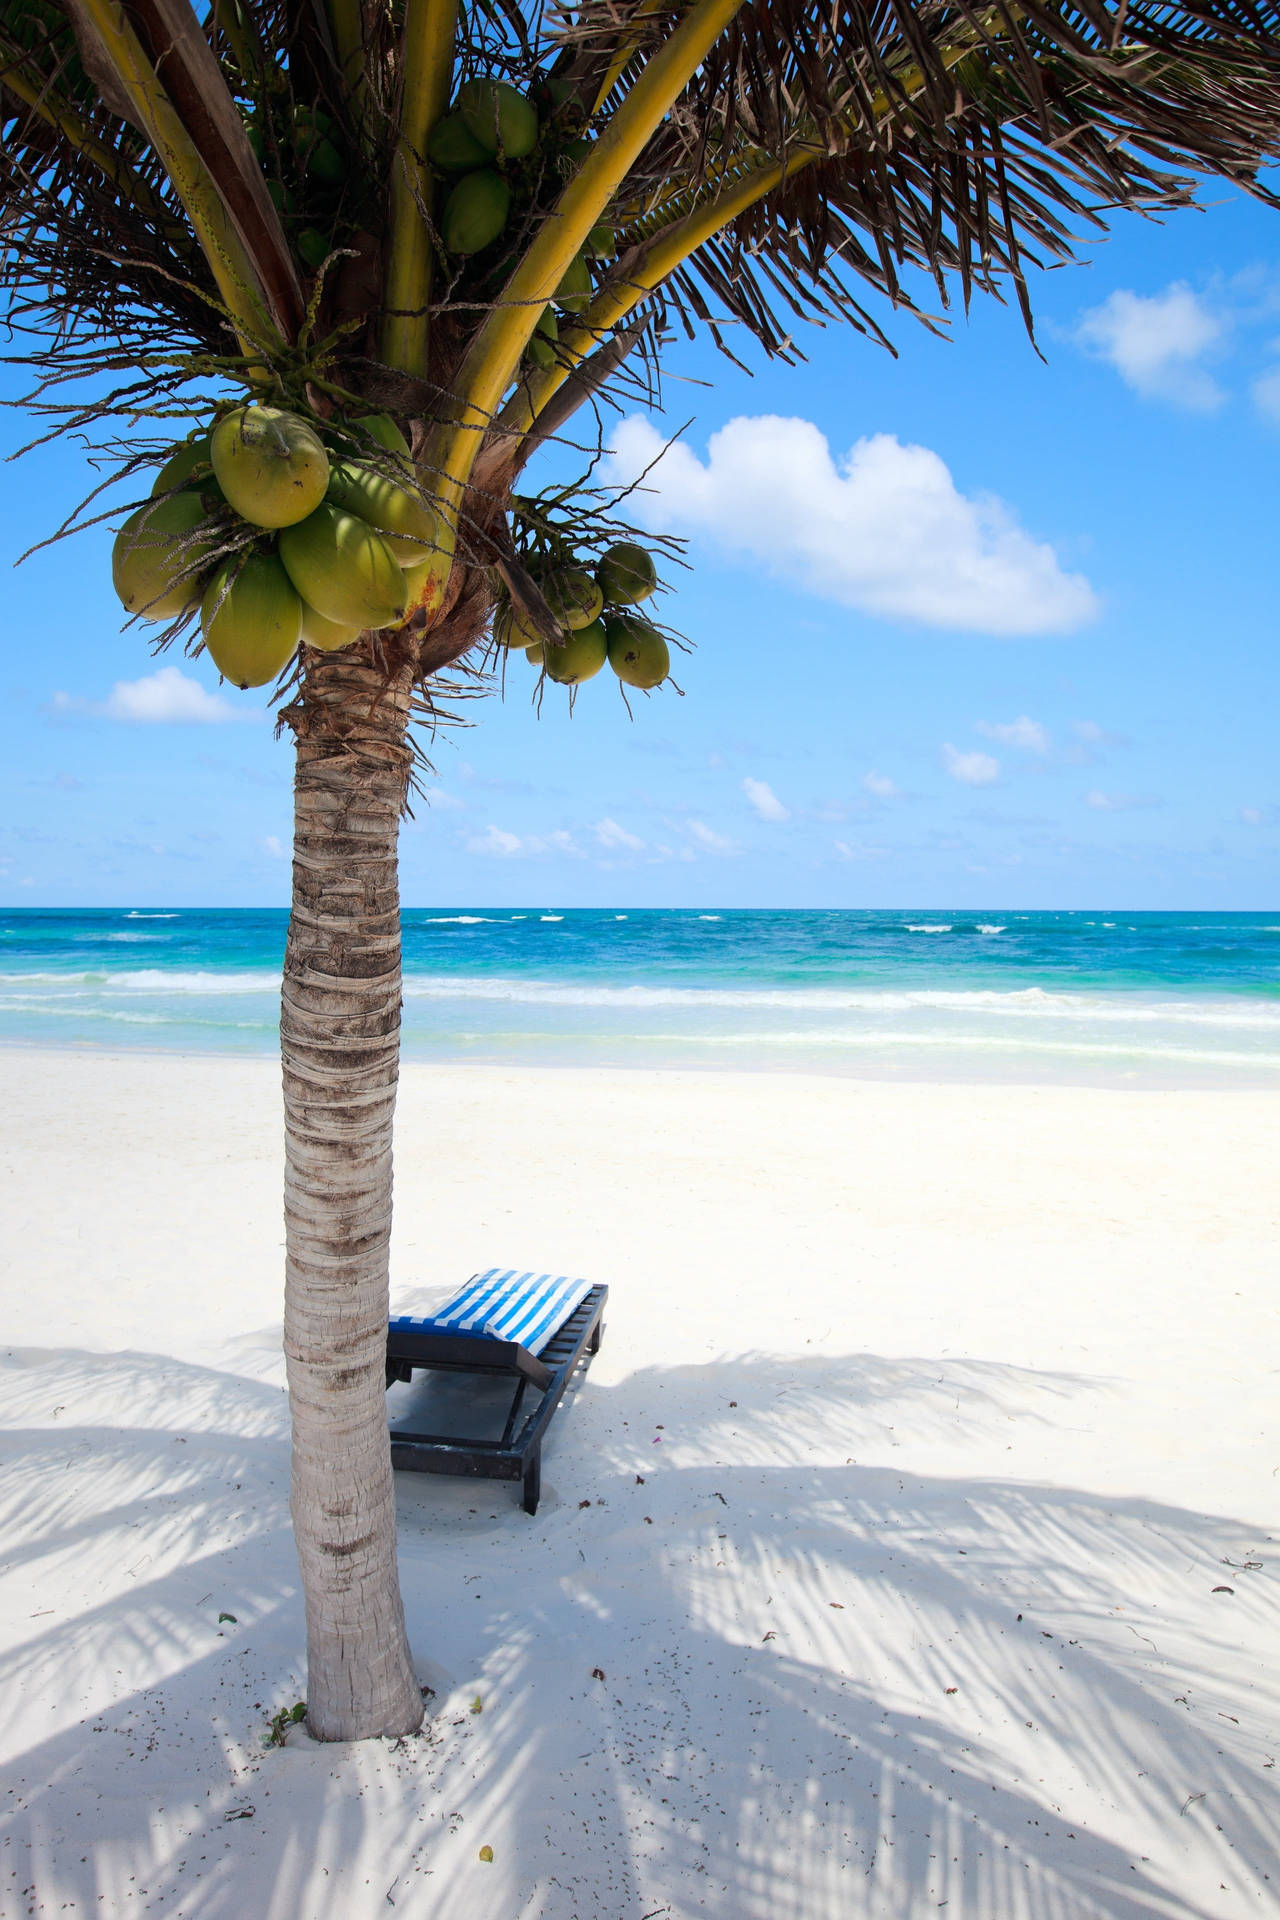 4k Iphone Coconut Tree And Beach Chair